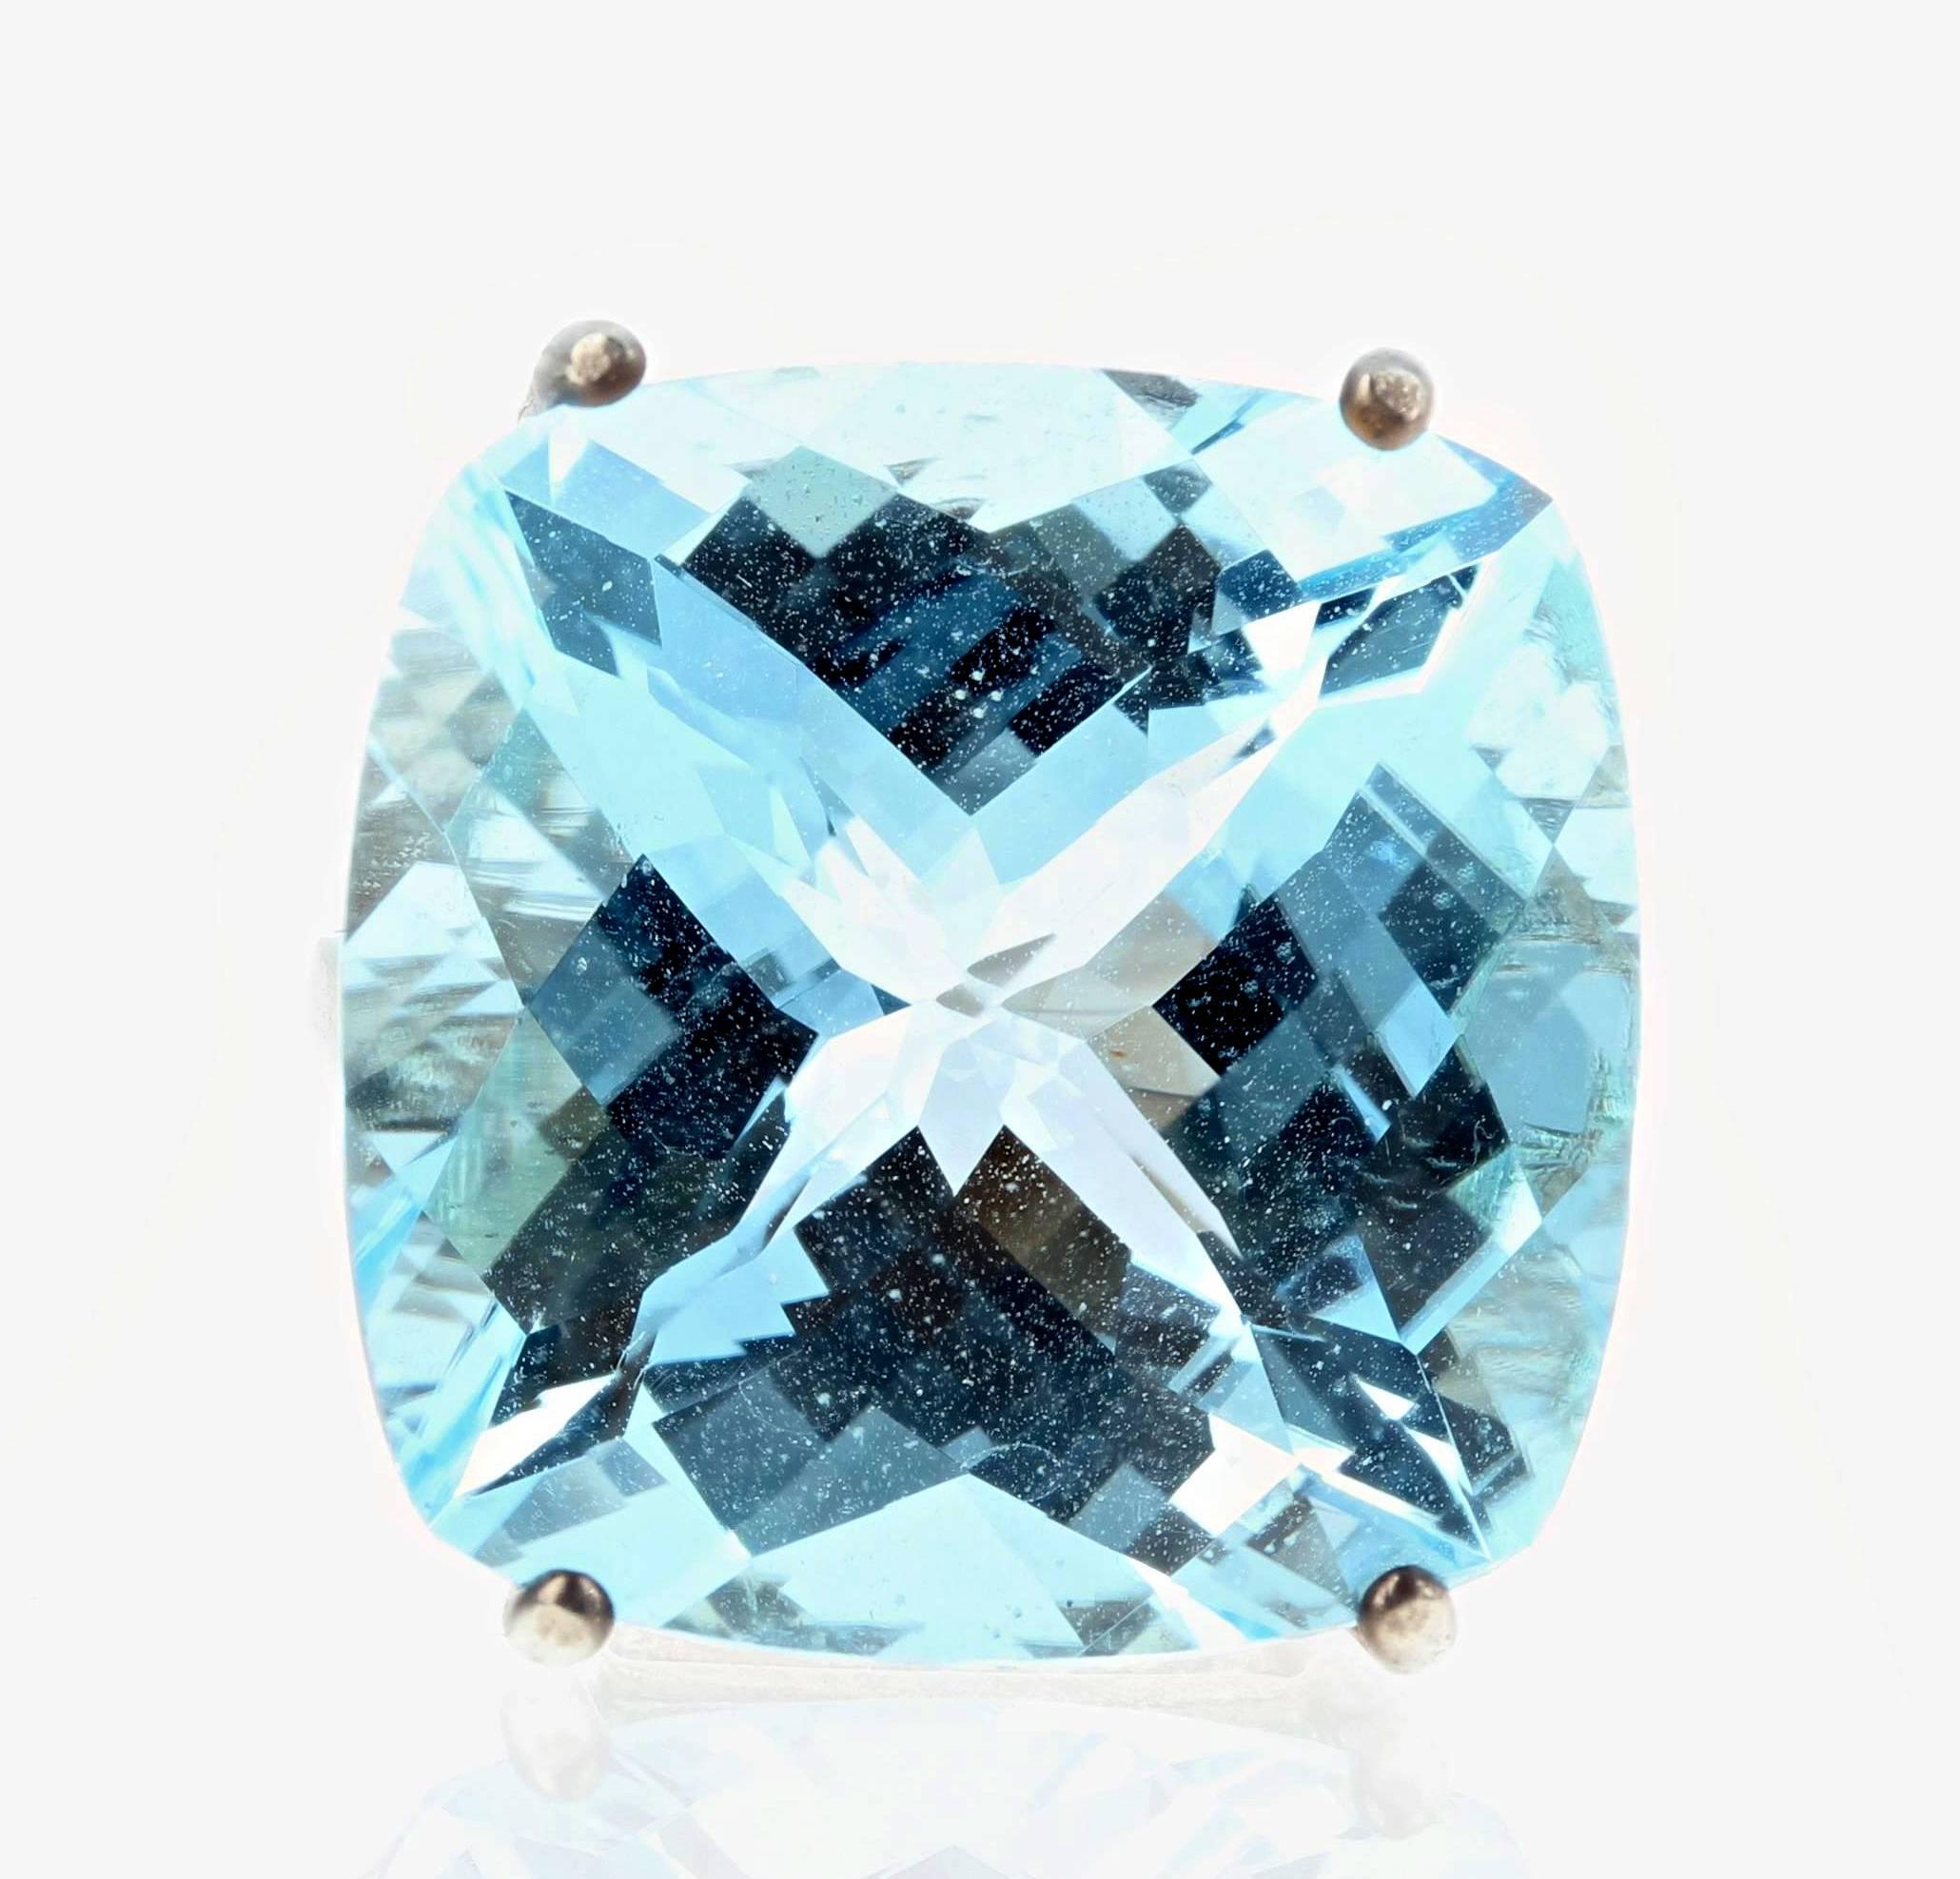 Glittering magnificent huge 37.86 carat blue Topaz (20 mm x 20 mm) set in a sterling silver ring size 7 (sizable) and comes with two bright blue Topaz sterling silver 10 mm round stud earrings as a gift from us to the purchaser of the ring..  There